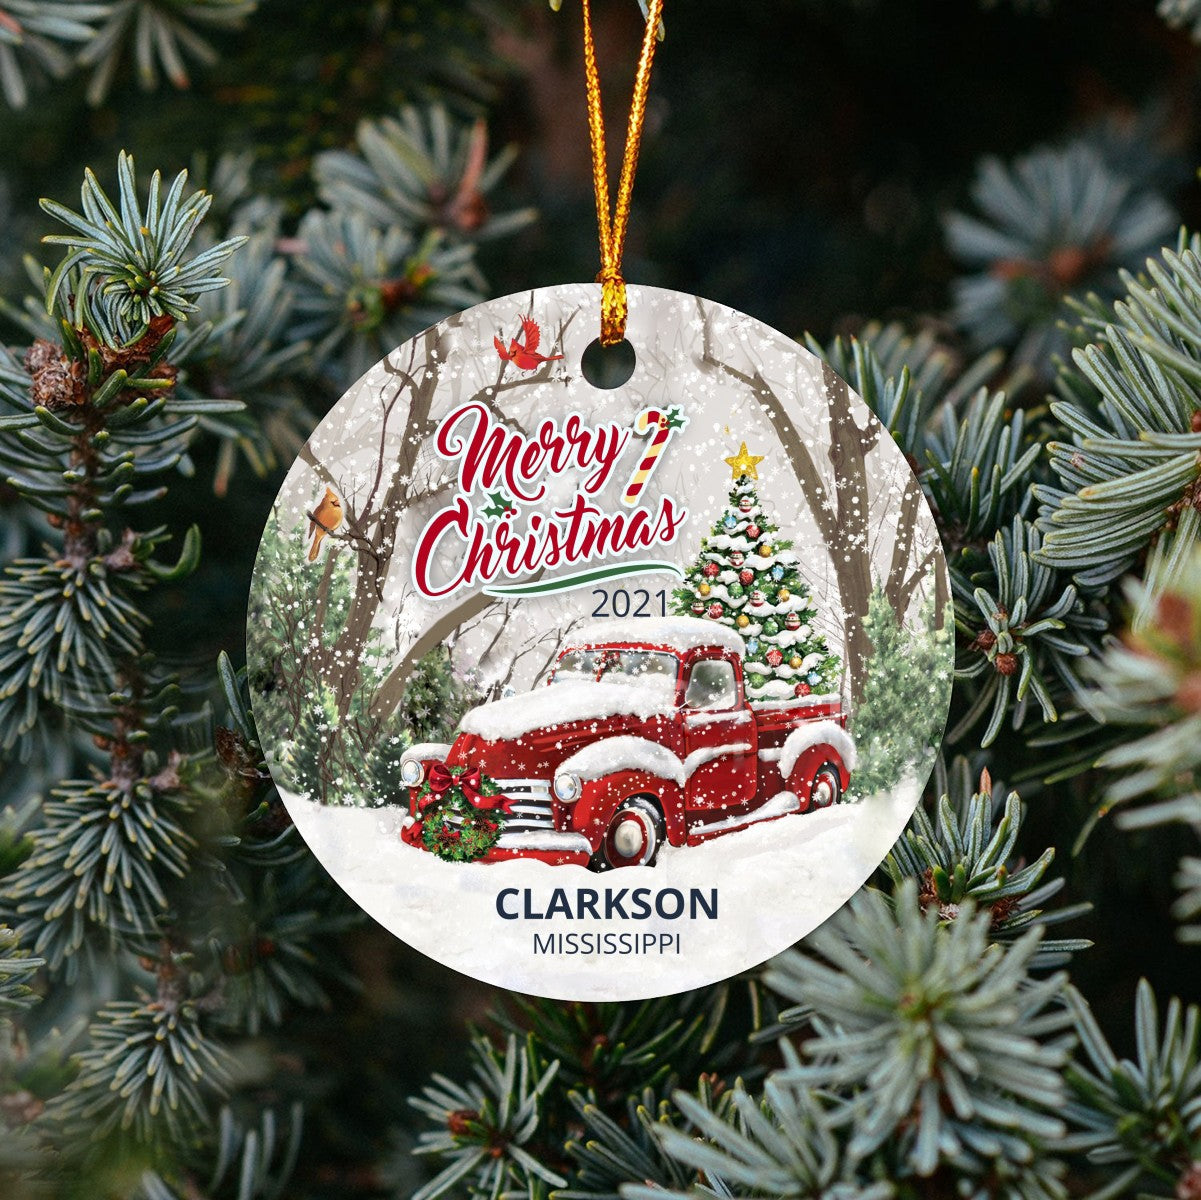 Christmas Tree Ornaments Clarkson - Ornament With Name City, State Clarkson Mississippi MS Ornament - Red Truck Xmas Ornaments 3'' Plastic Gift For Family, Friend And Housewarming